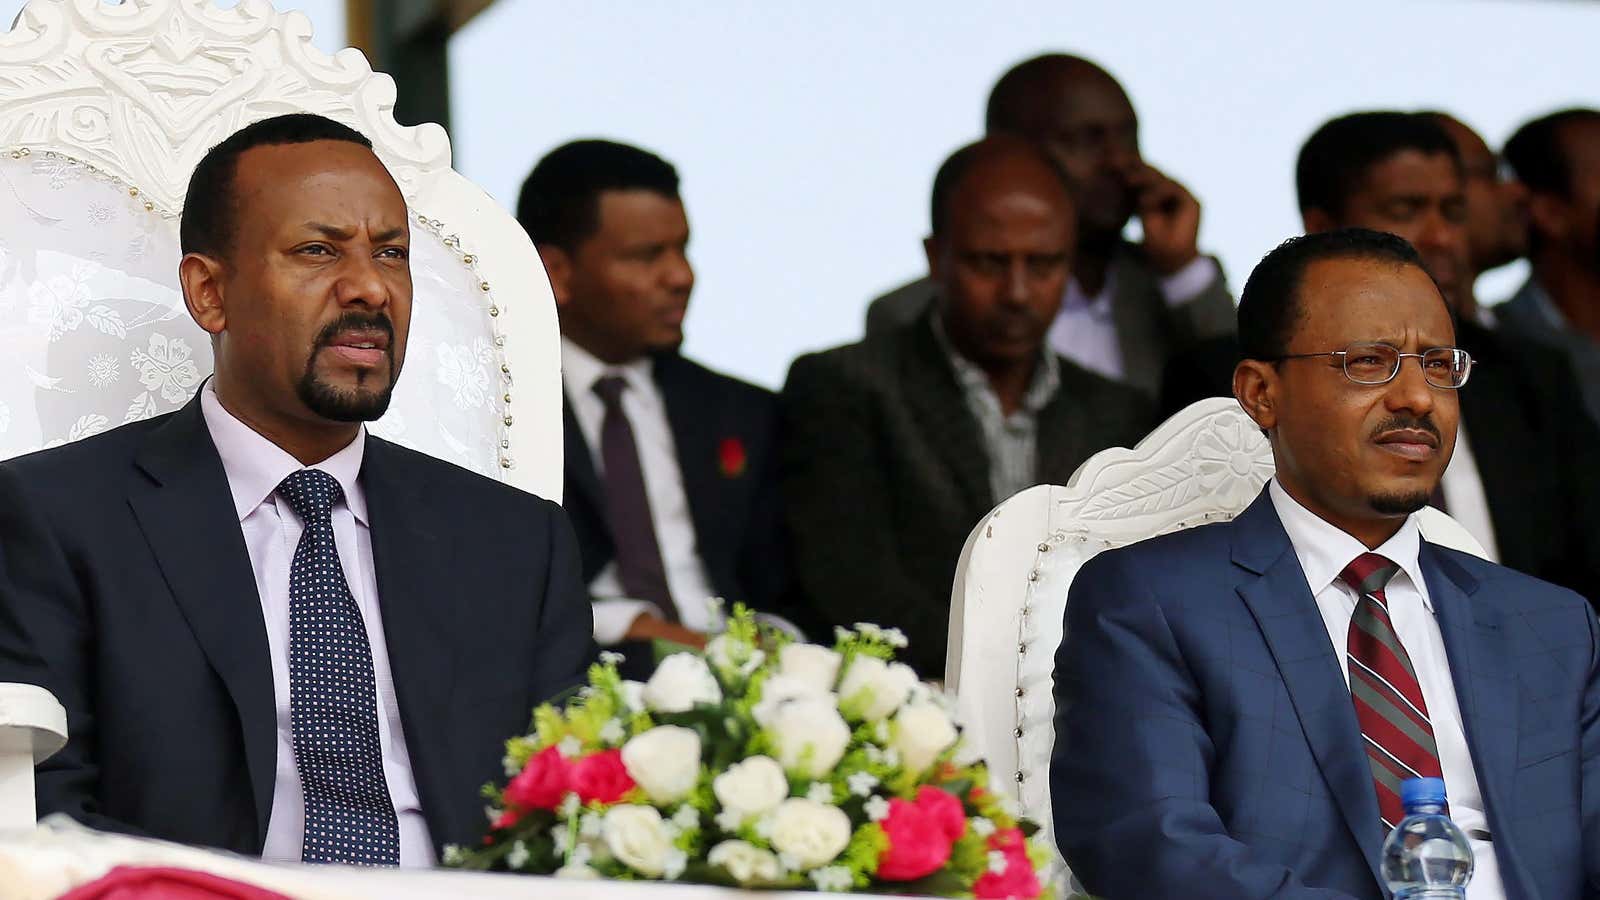 Et tu? Ethiopia’s prime minister Abiy Ahmed and, now former, defense minister Lemma Megersa back in April 2018.